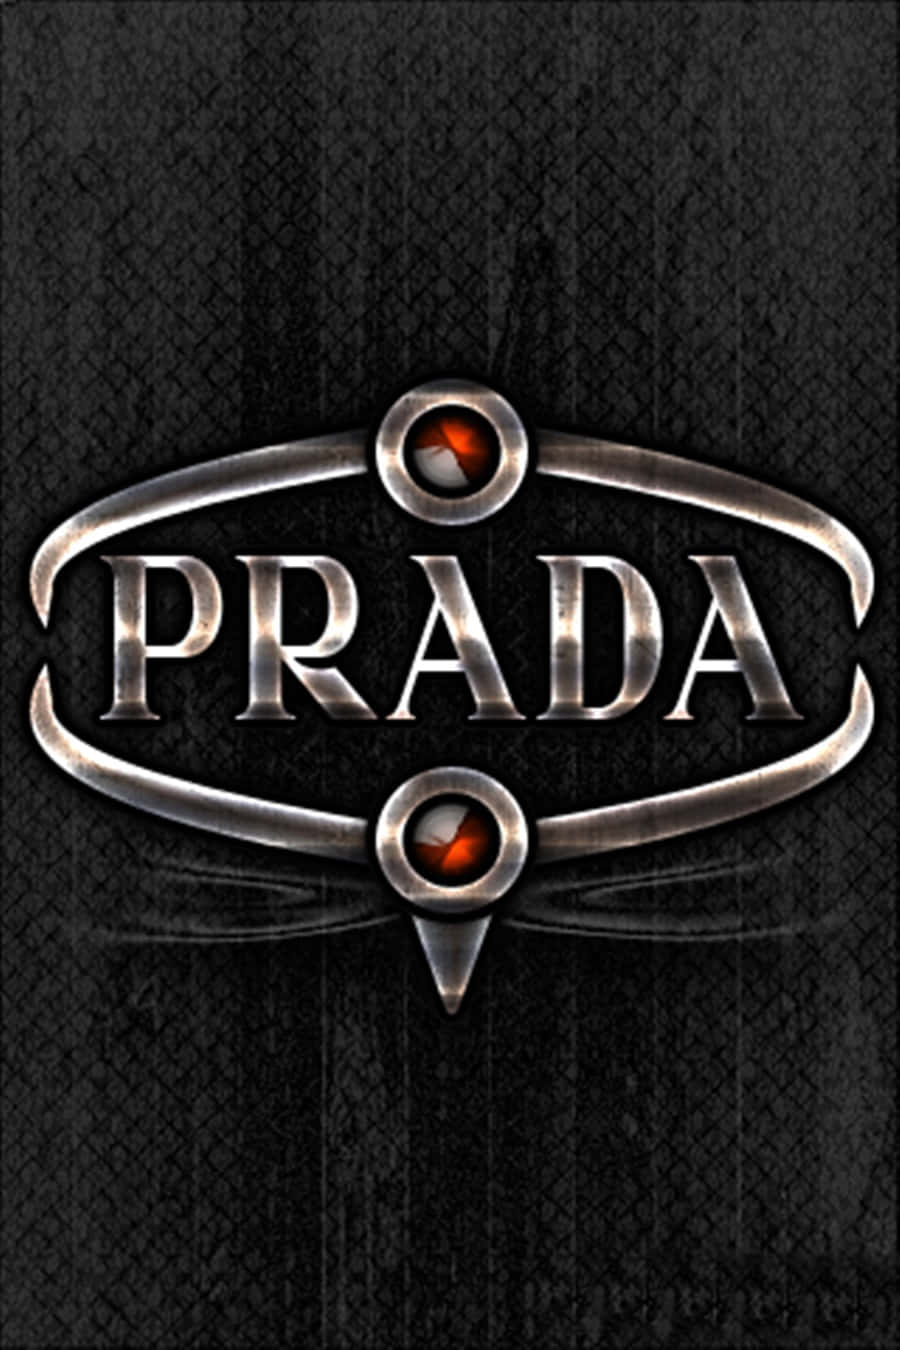 If you want quality and style, you want Prada